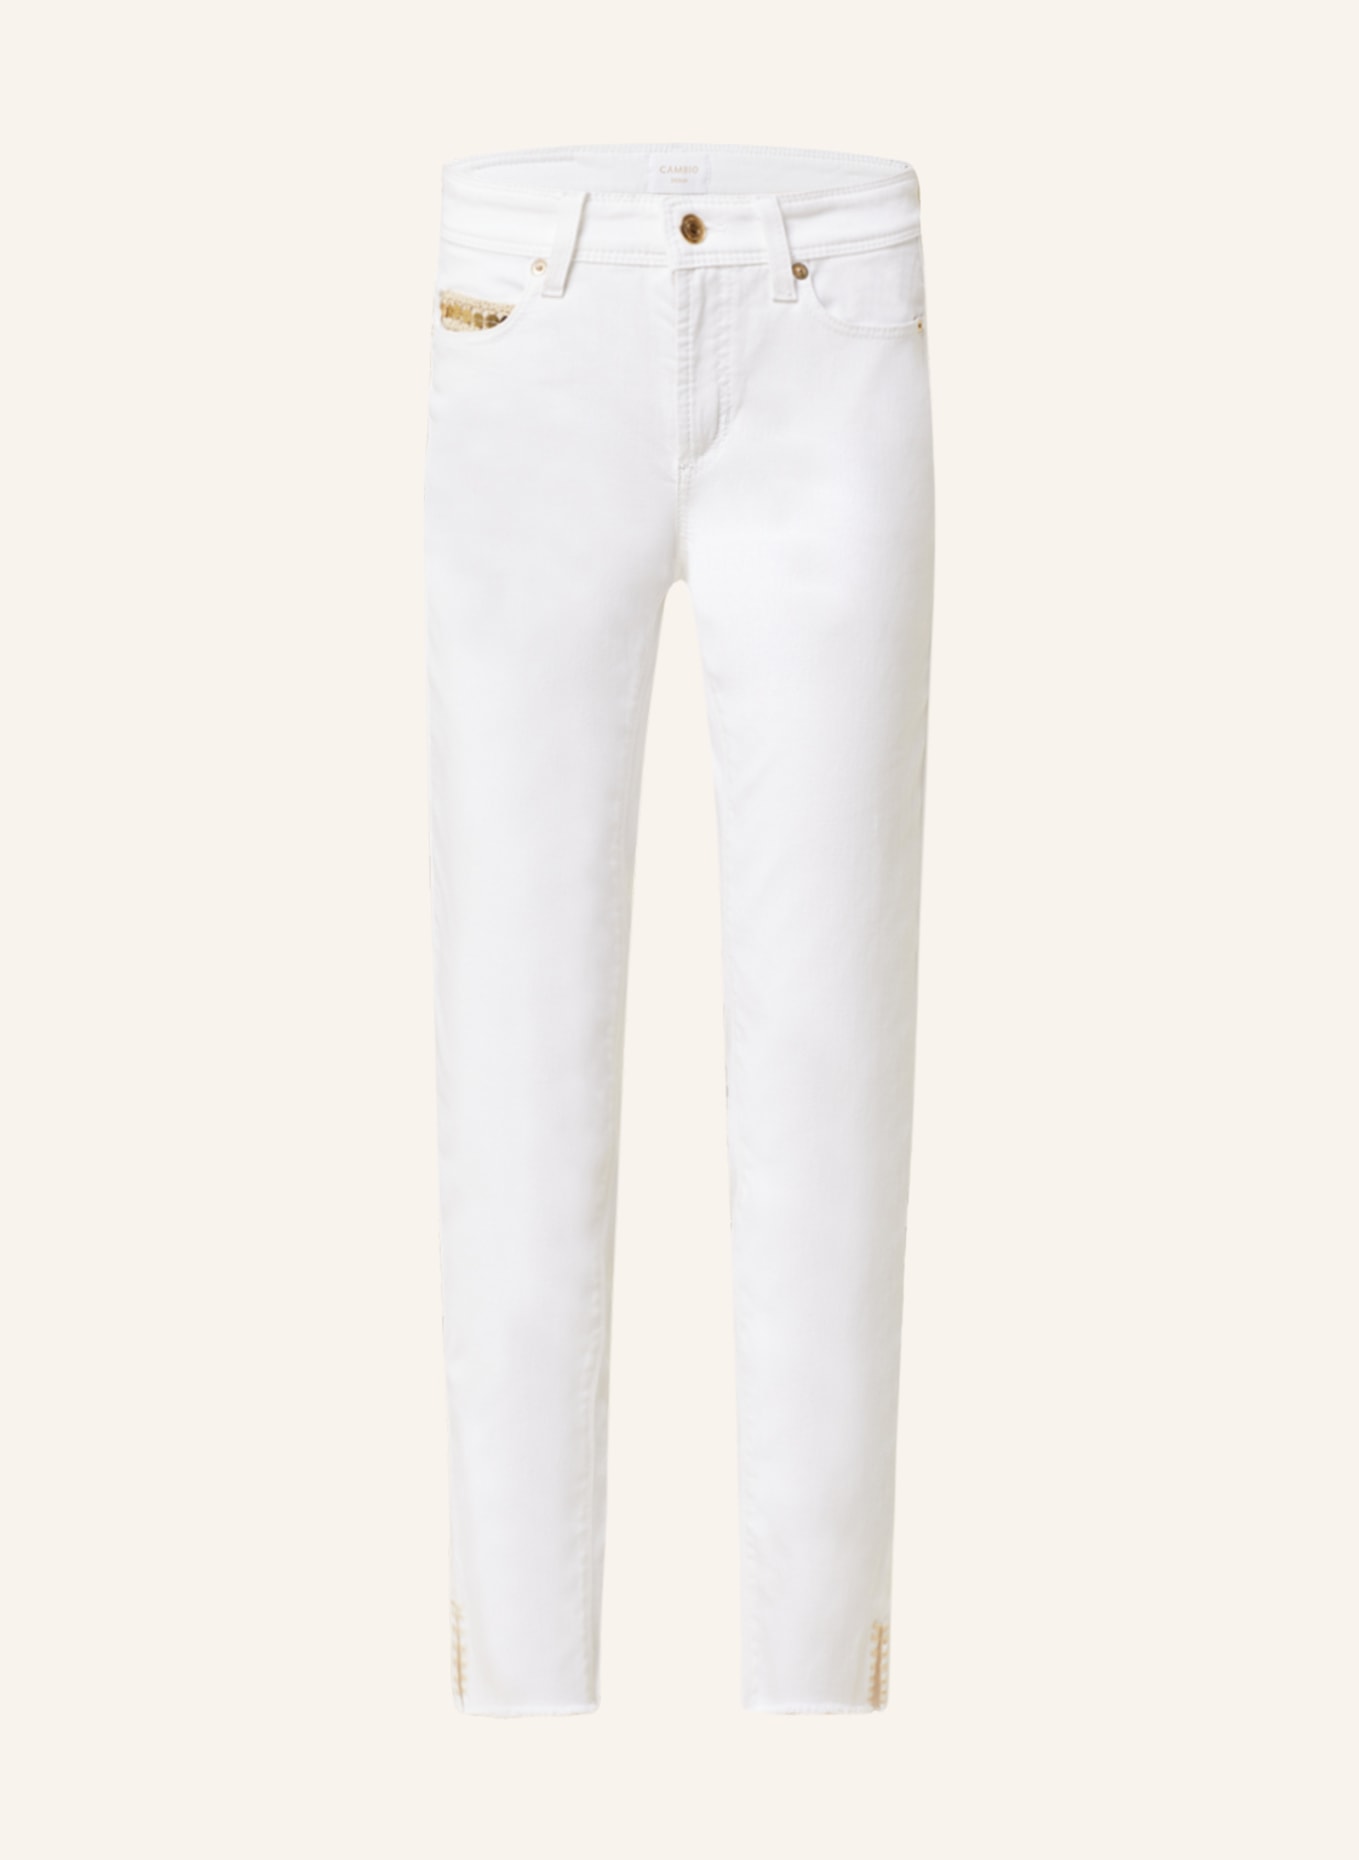 CAMBIO Jeans PIPER, Color: 5009 softwash & fringed (Image 1)